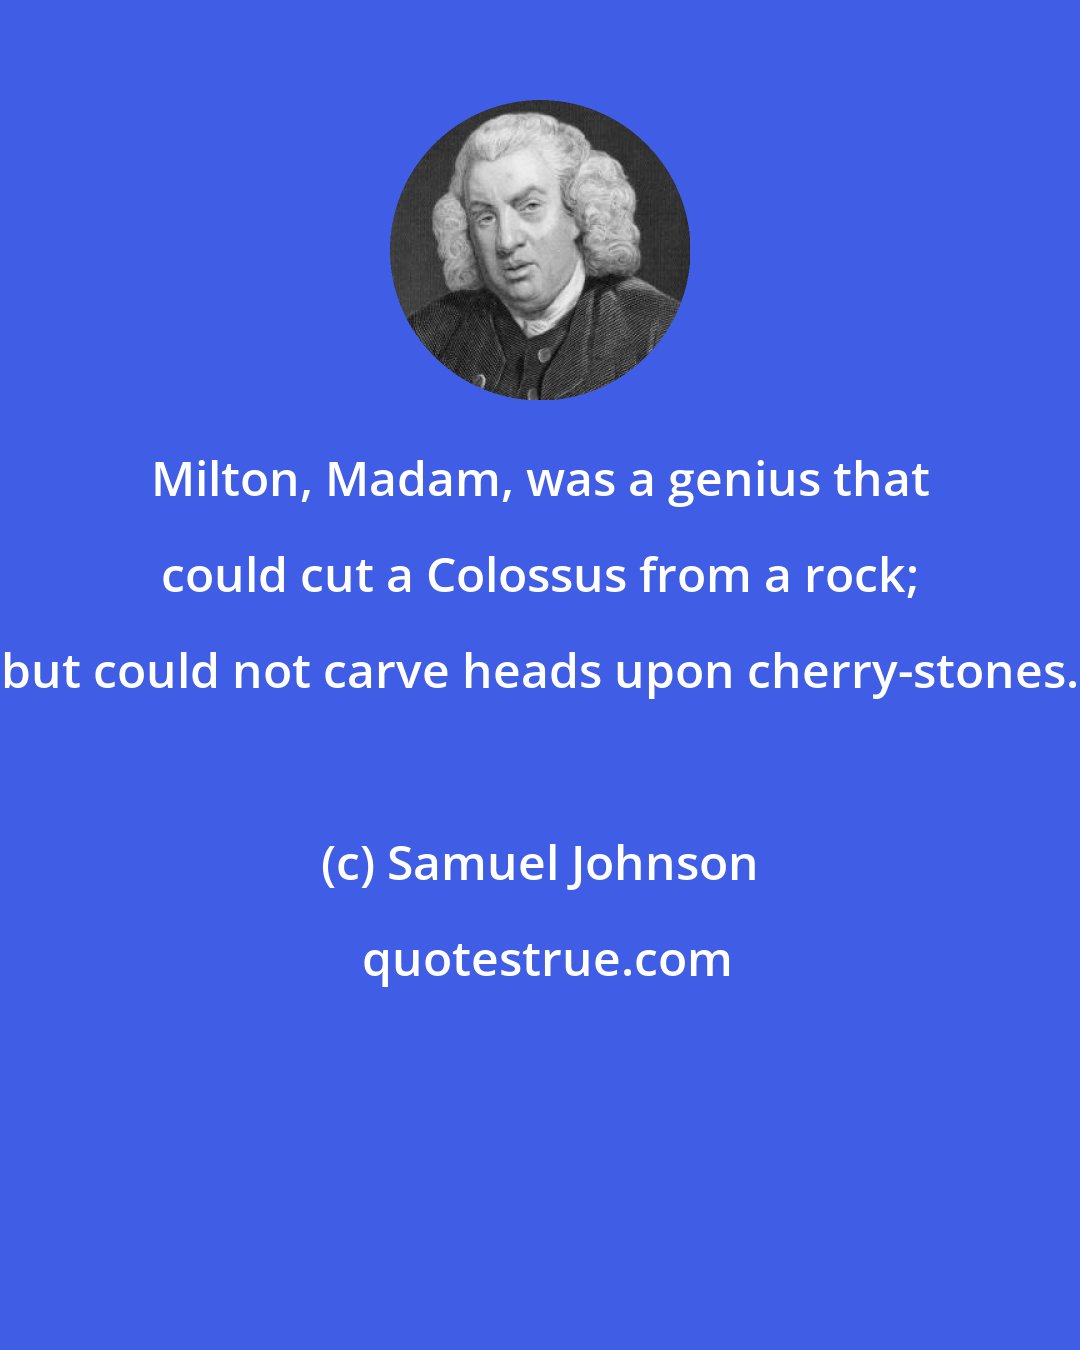 Samuel Johnson: Milton, Madam, was a genius that could cut a Colossus from a rock; but could not carve heads upon cherry-stones.